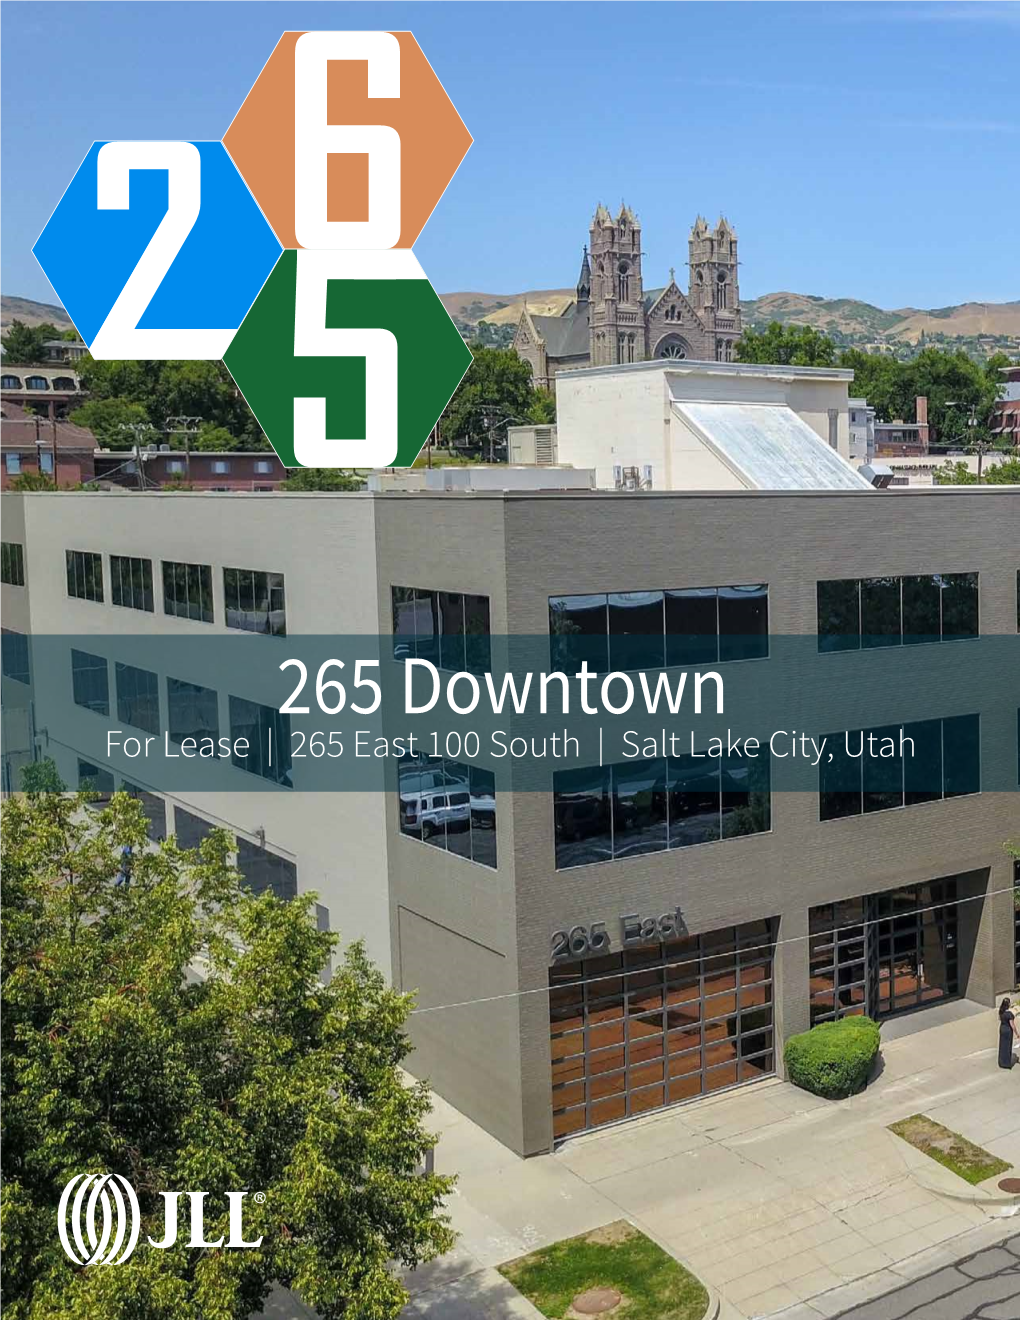 265 Downtown for Lease | 265 East 100 South | Salt Lake City, Utah LARGE CONFERENCE